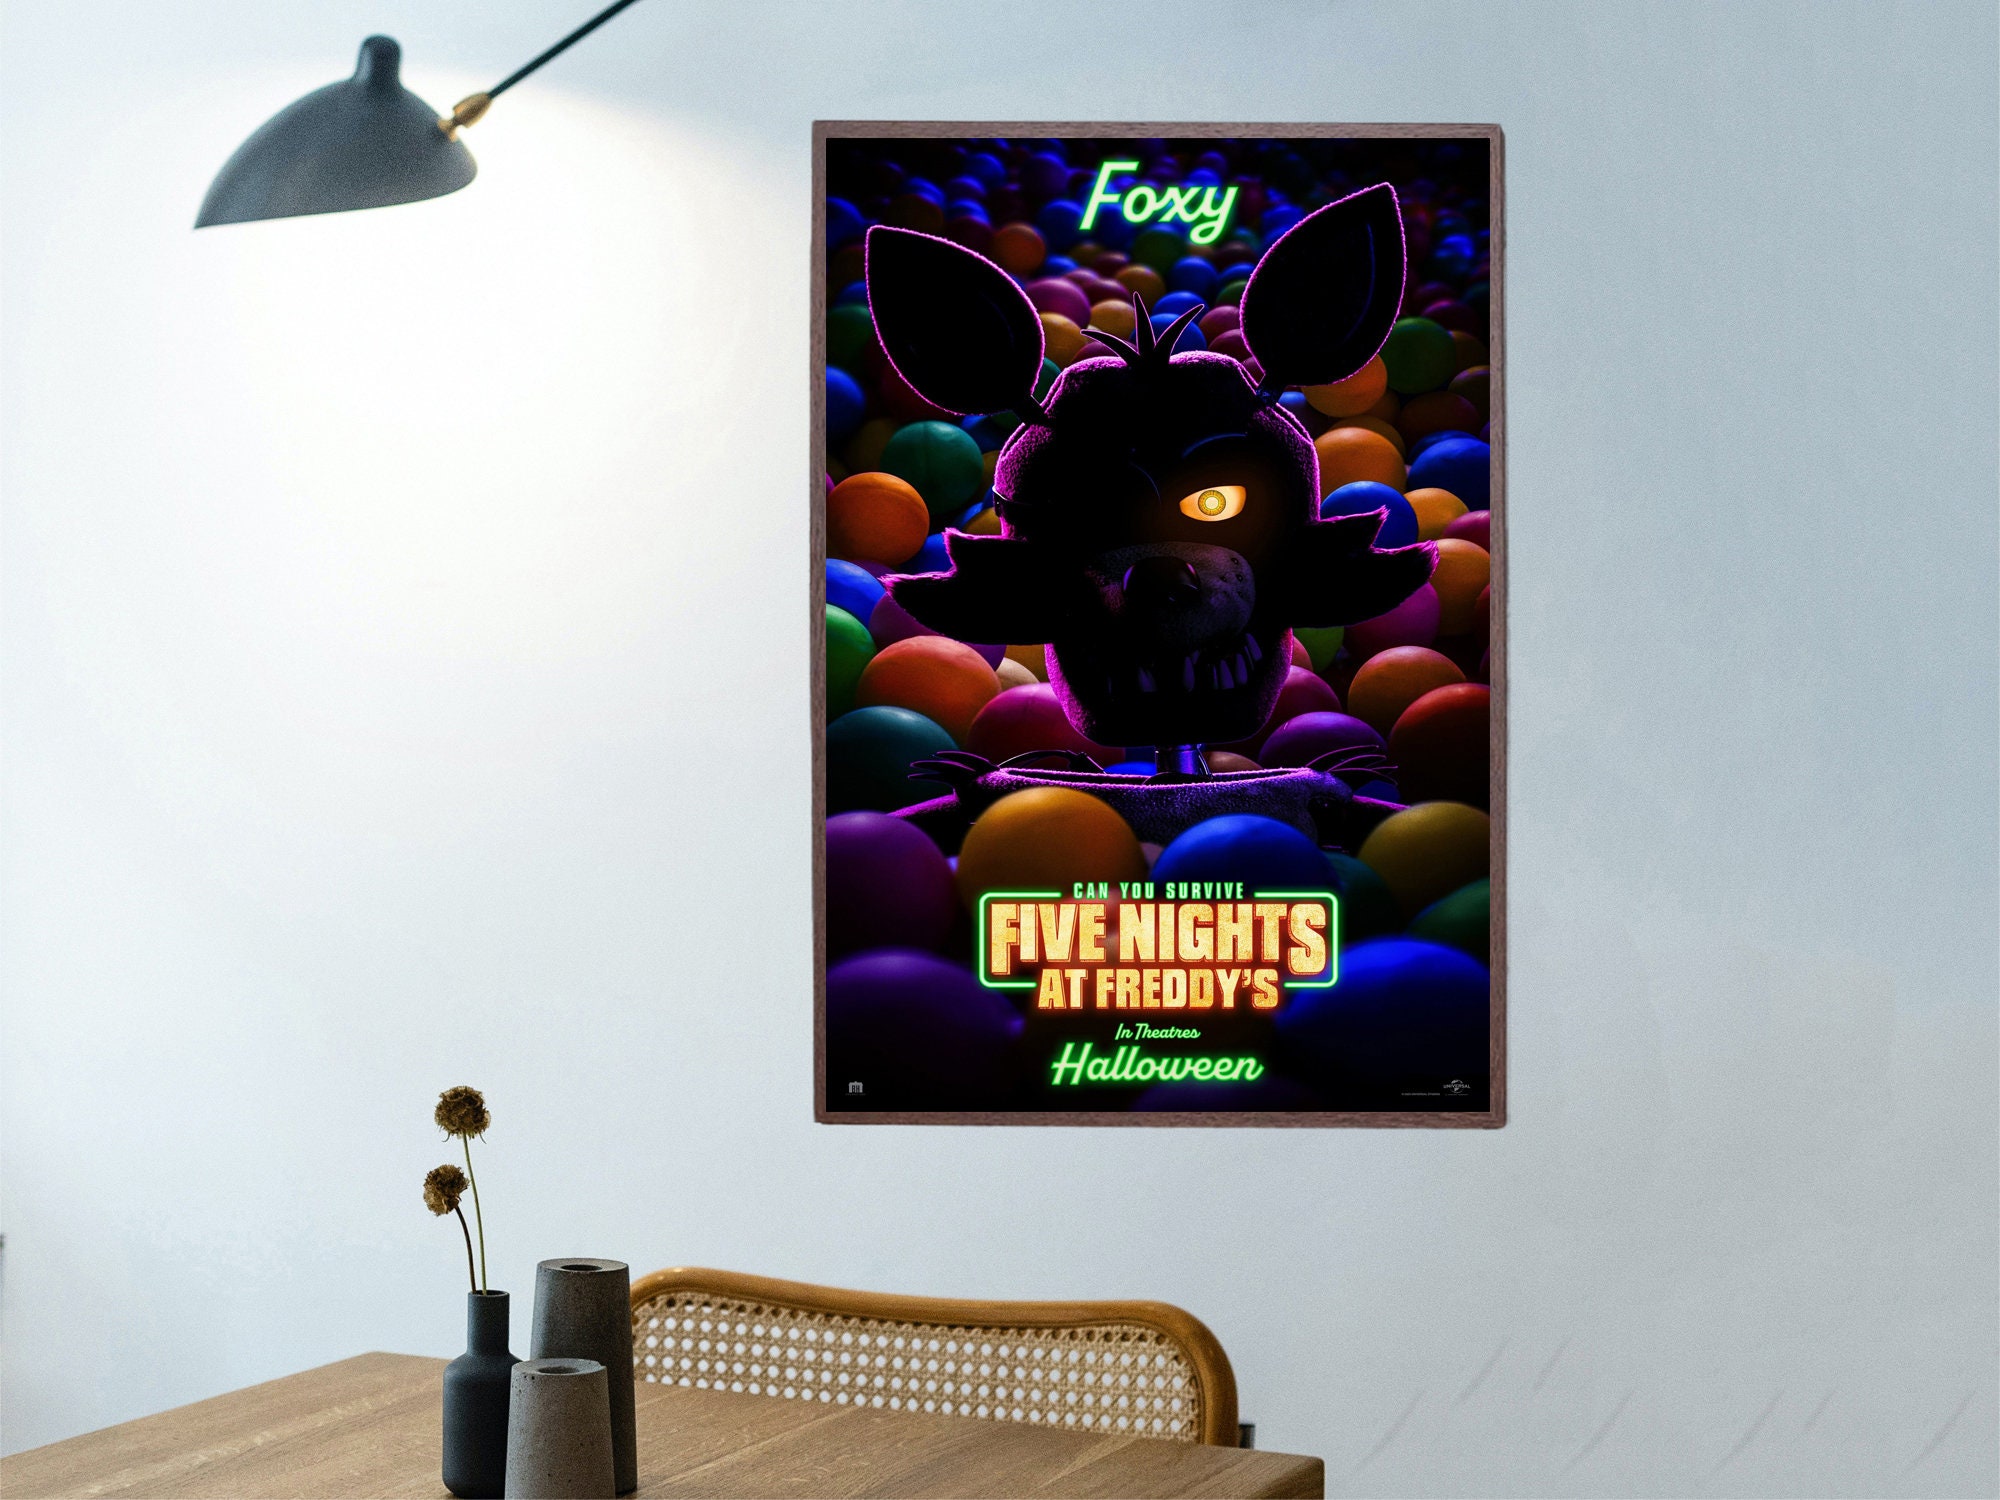 Discover Five Nights at Freddy's movie posters/classic hit movie posters